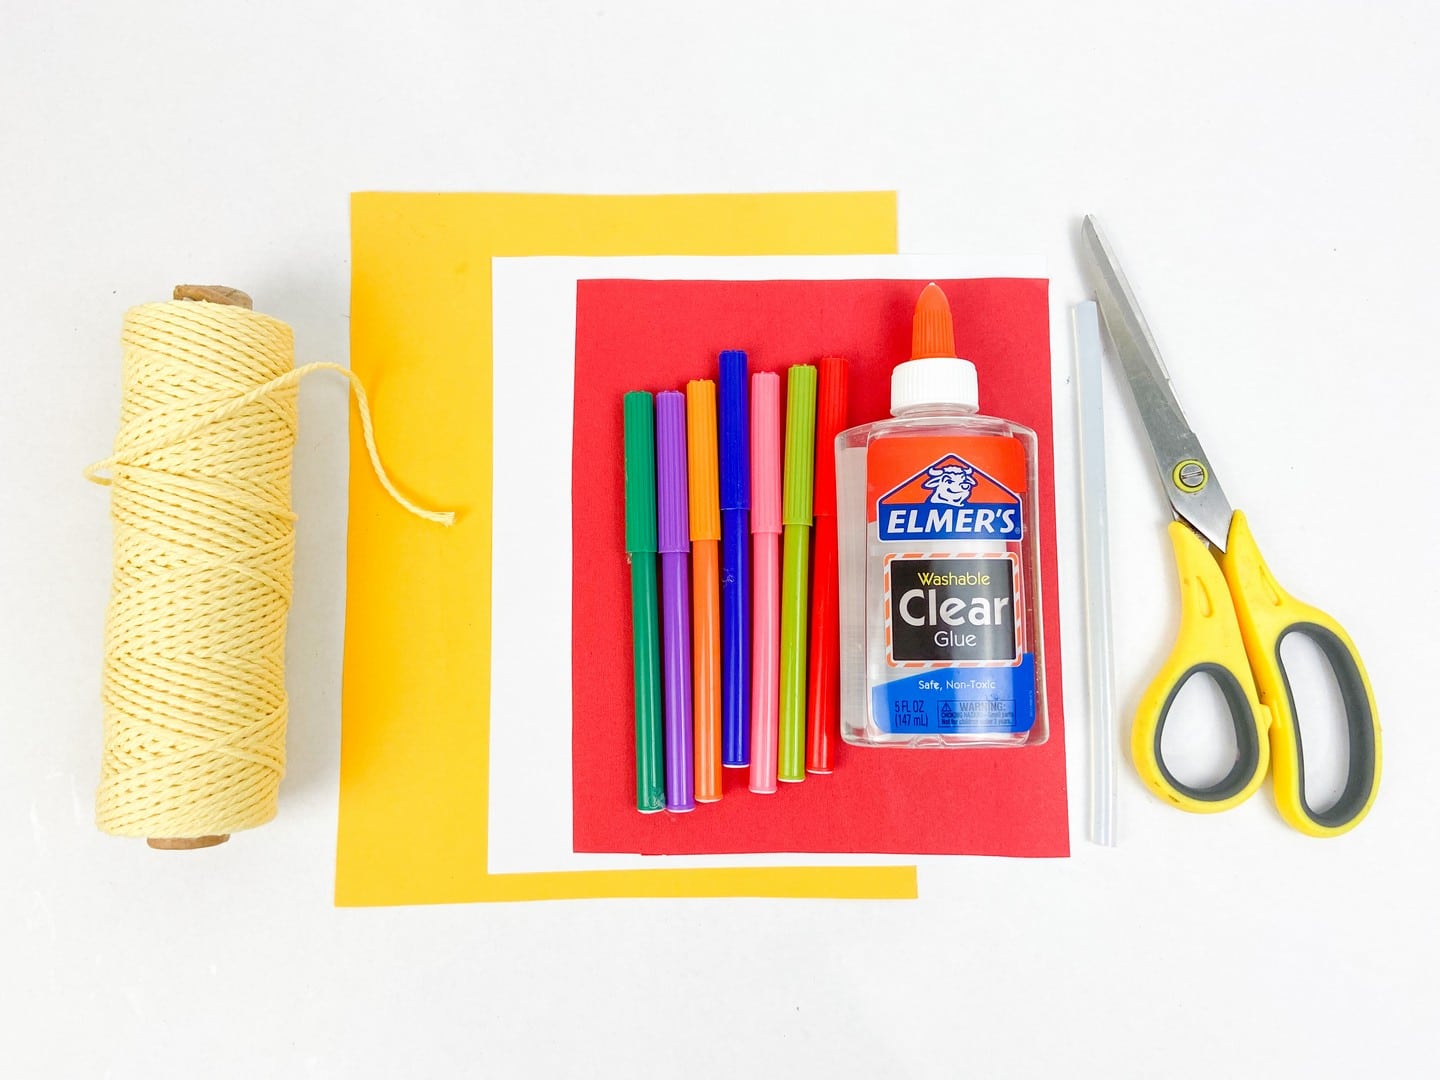 Supplies needed: string, colorful markers, glue, glue stick, yellow handled scissors, and paper in yellow, white, and red. 